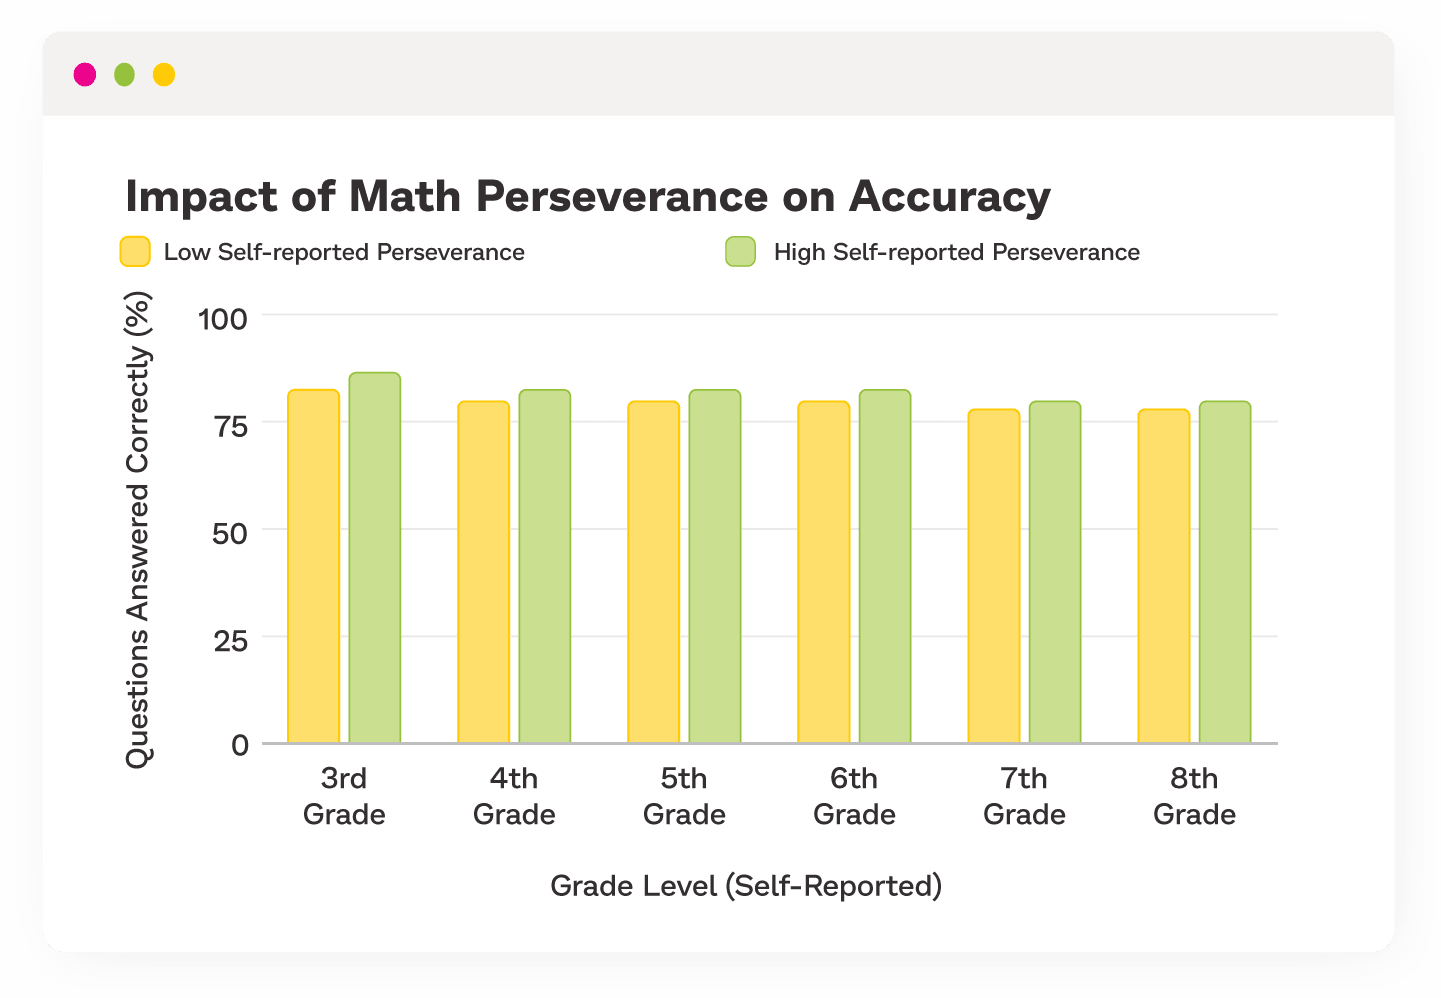 Bar chart broken down by grade showing the impact of math perseverance on accuracy.